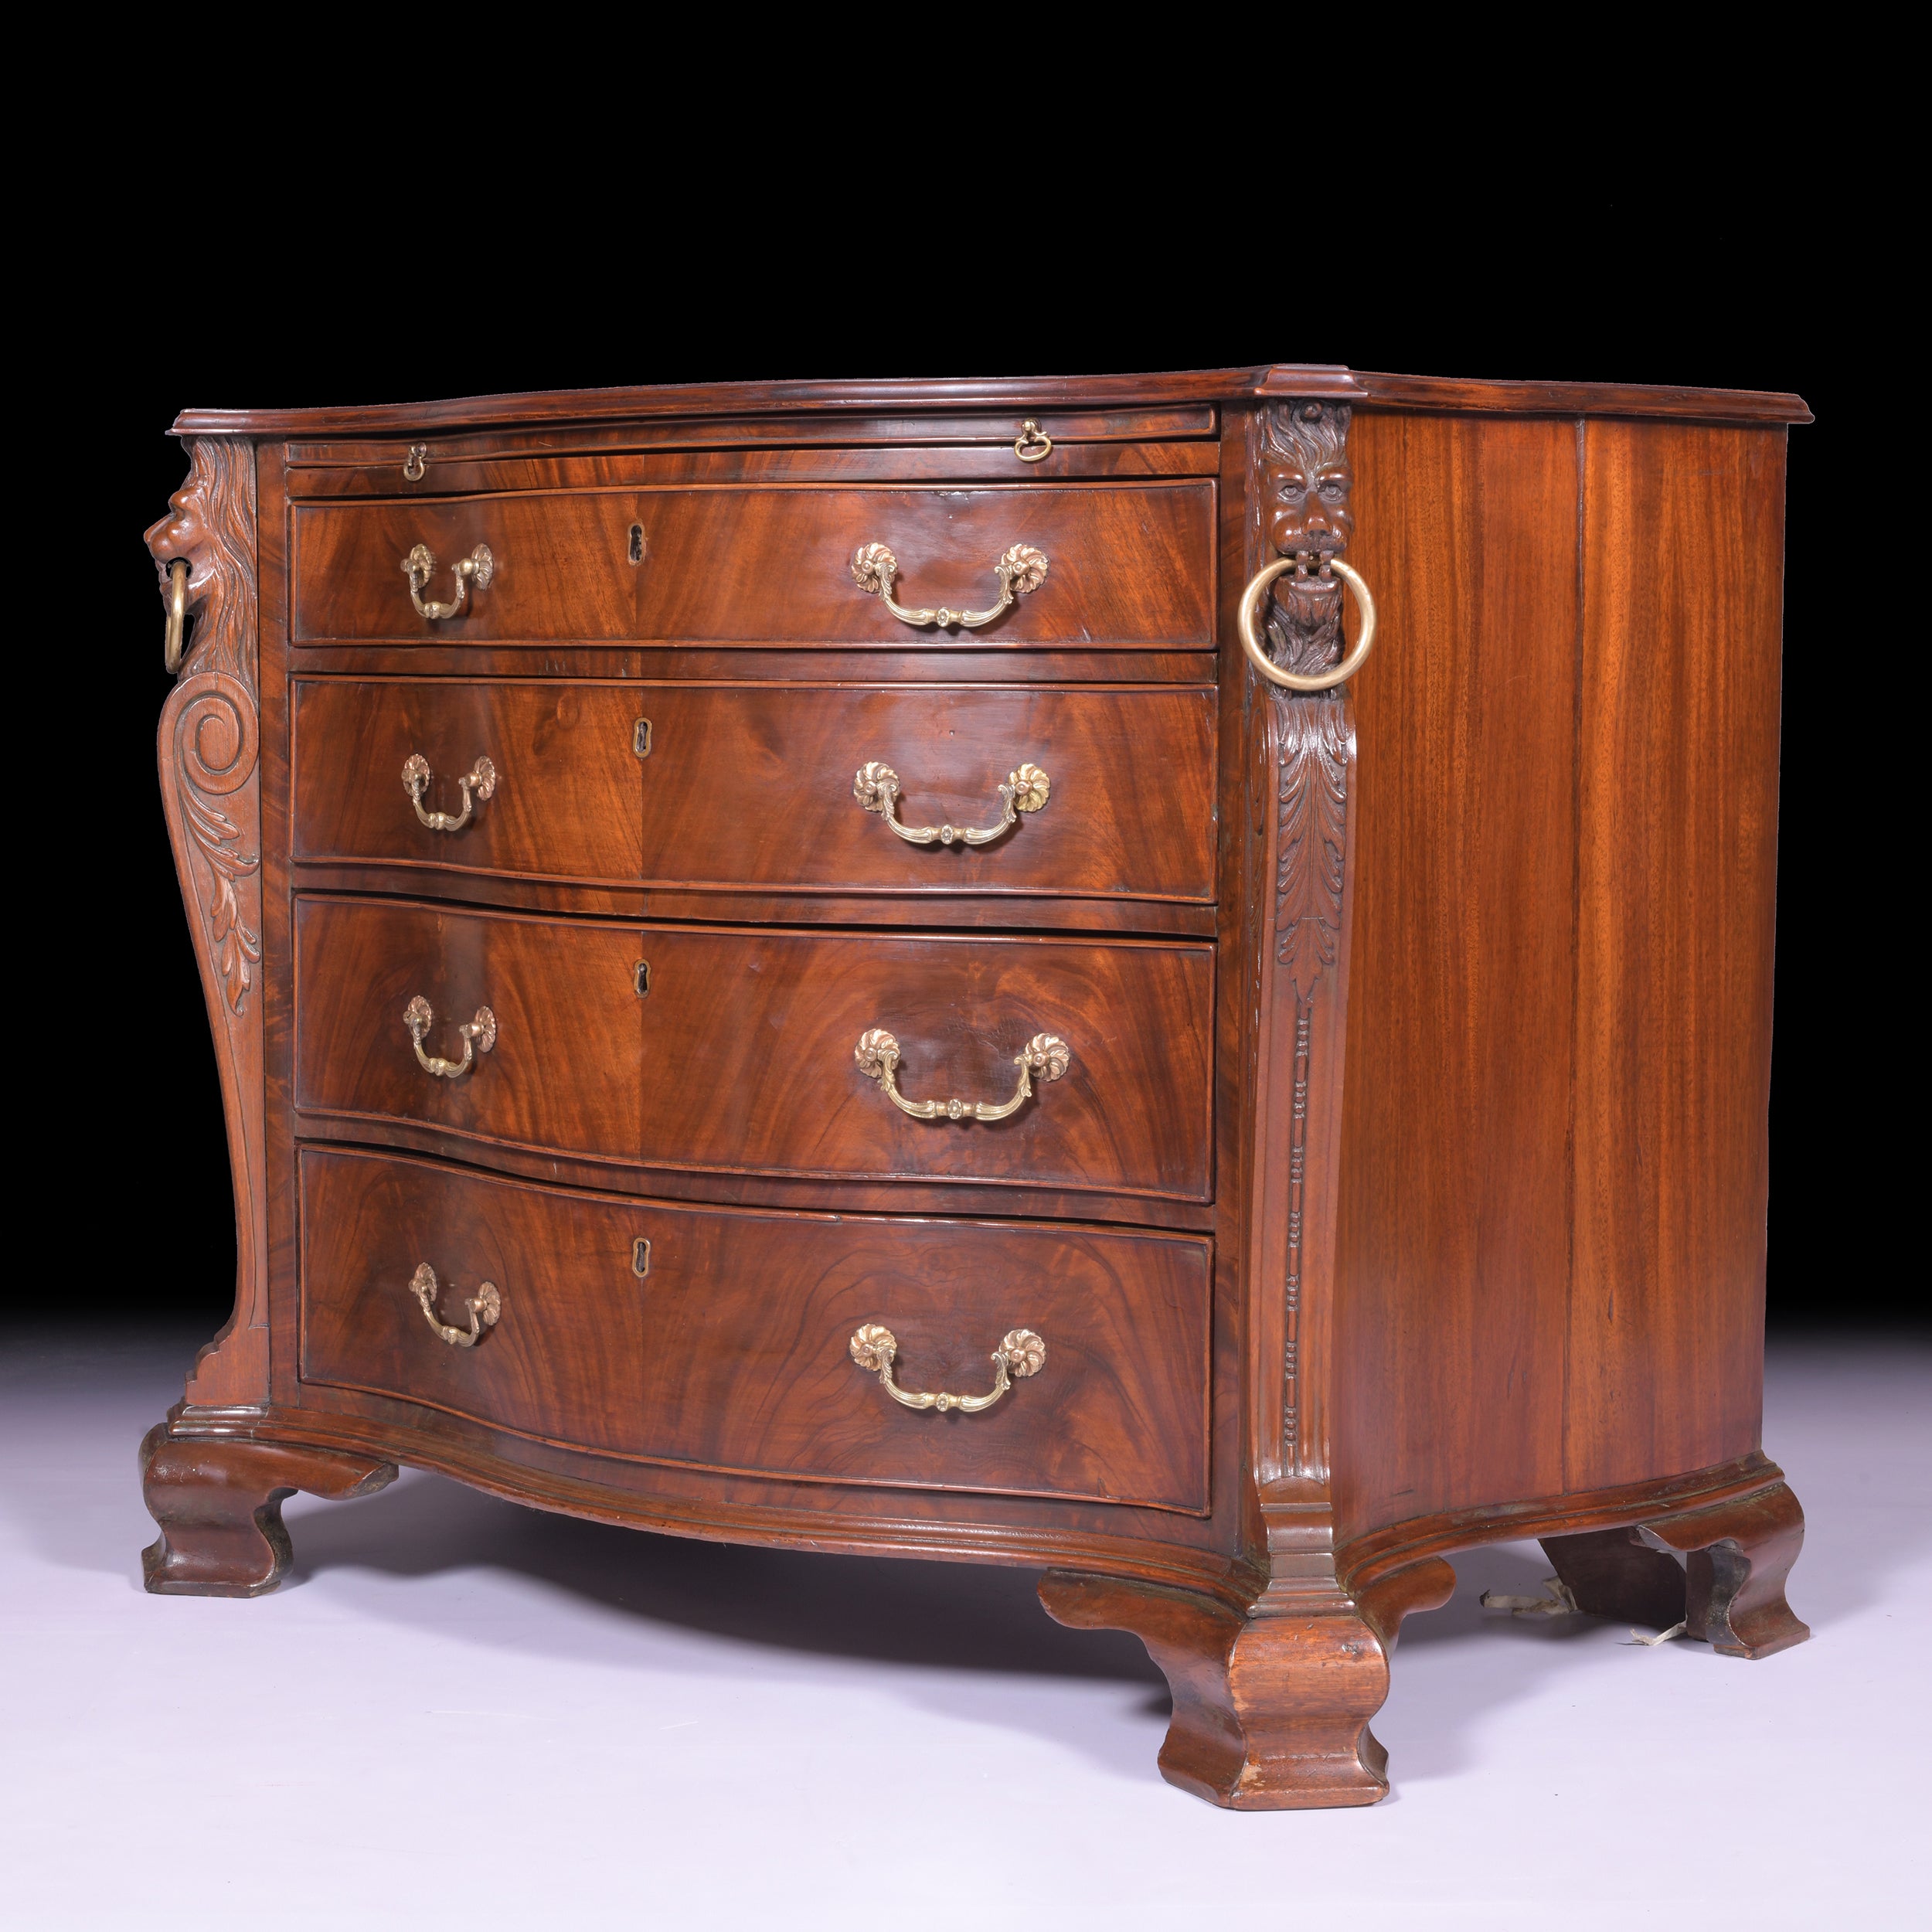 GEORGE II STYLE SERPENTINE COMMODE - REF No. 4050